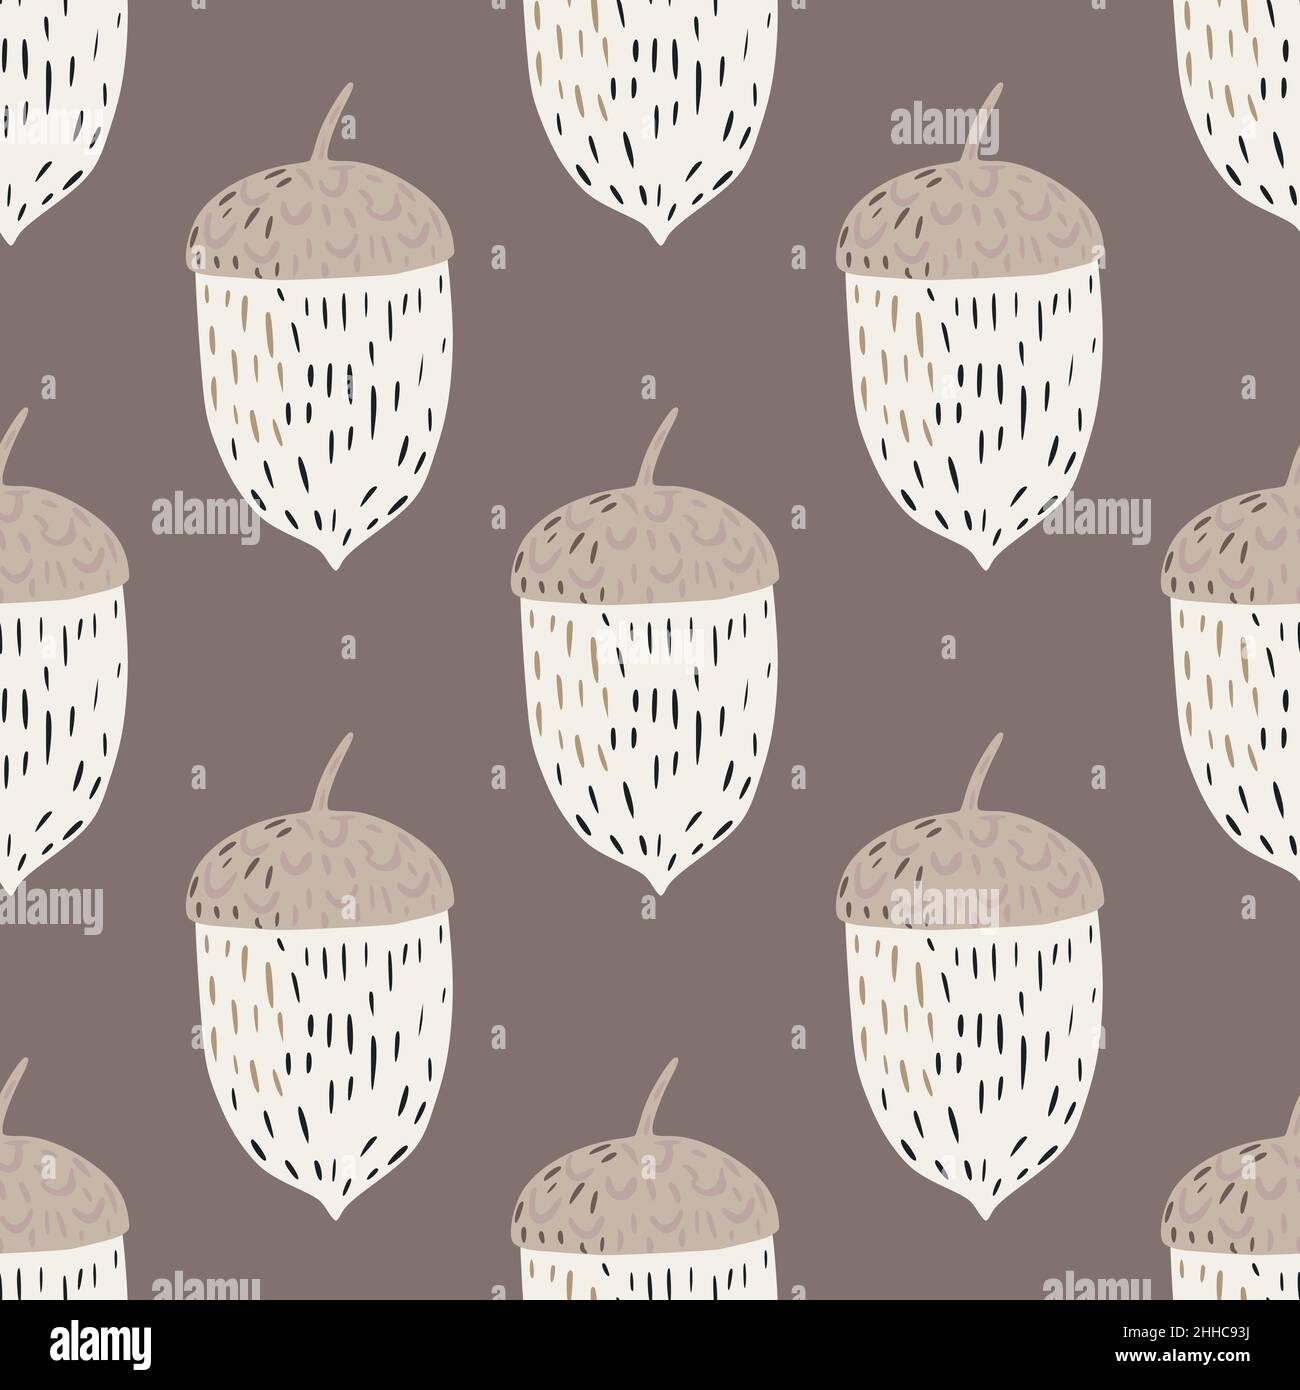 Pale seamless hand drawn pattern with beige and white tones chestnut shapes. Grey background. Graphic design for wrapping paper and fabric textures. V Stock Vector